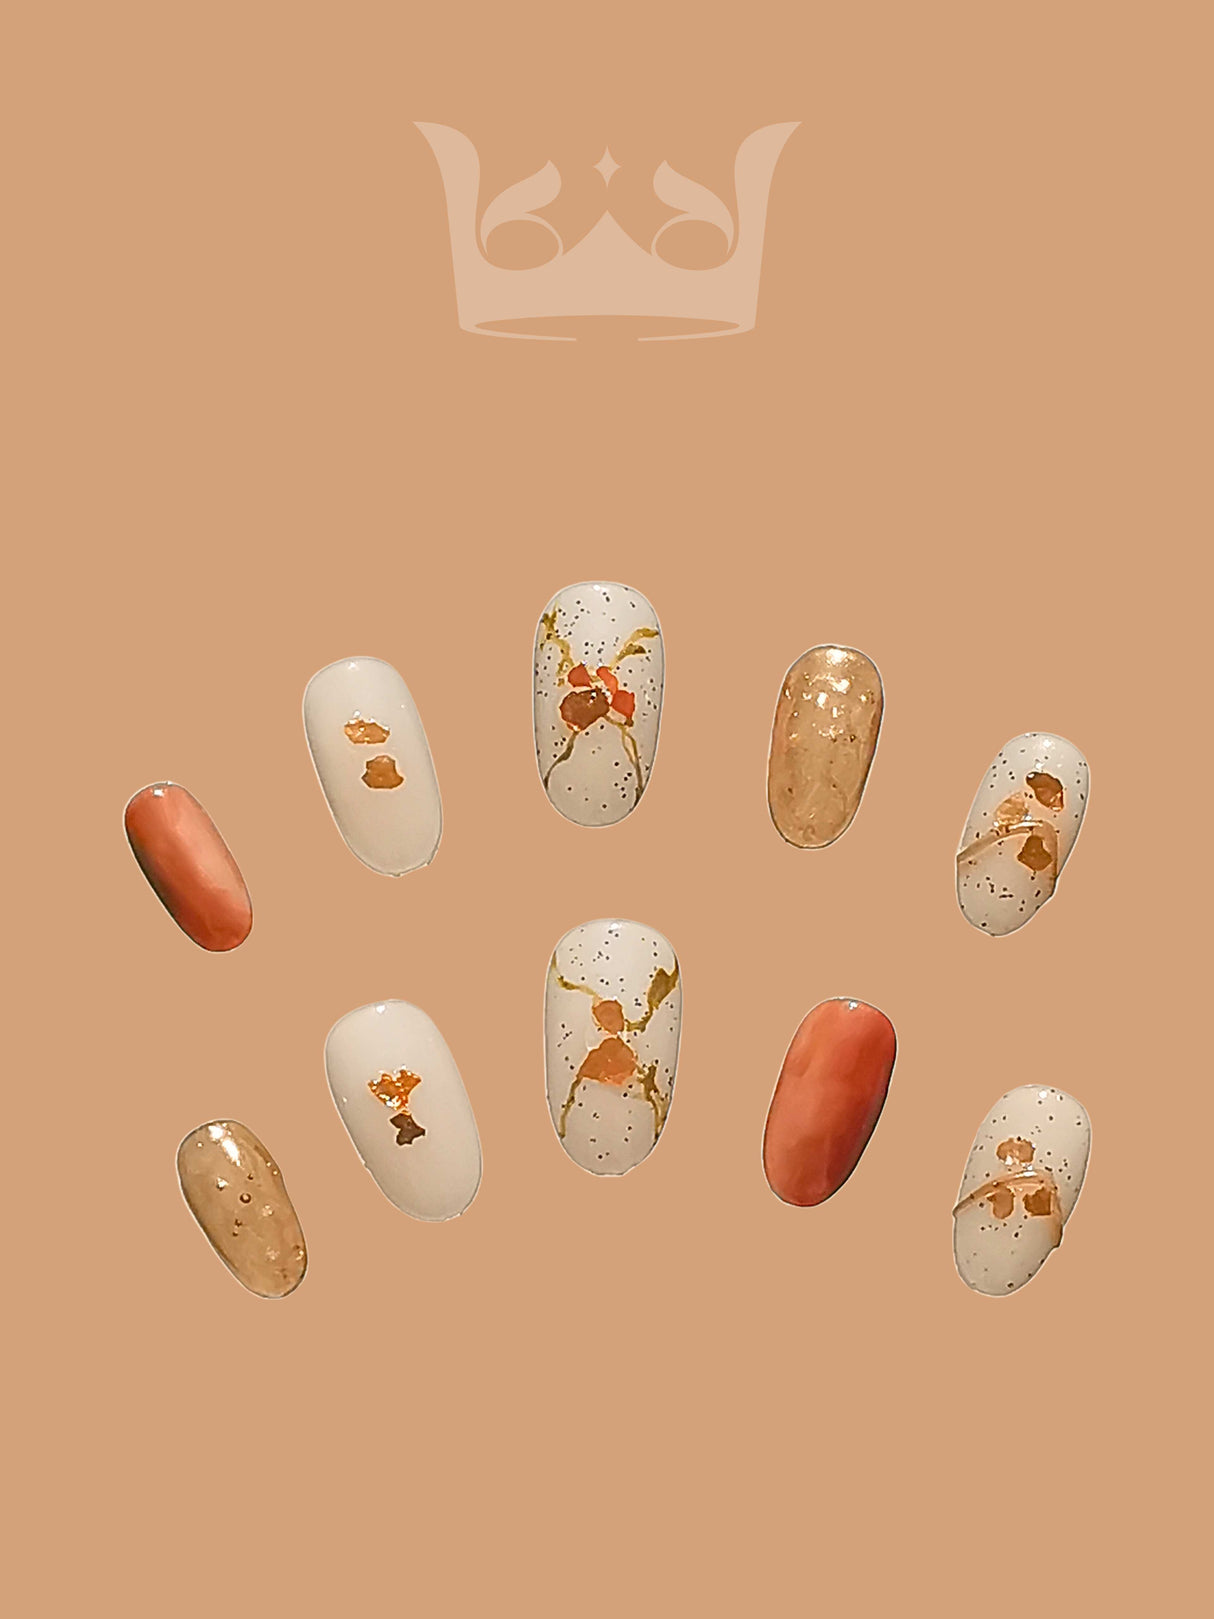 These press-on nails are for enhancing the appearance of natural nails with stylish designs. They come in almond nail shapes and warm colors with cute elements.